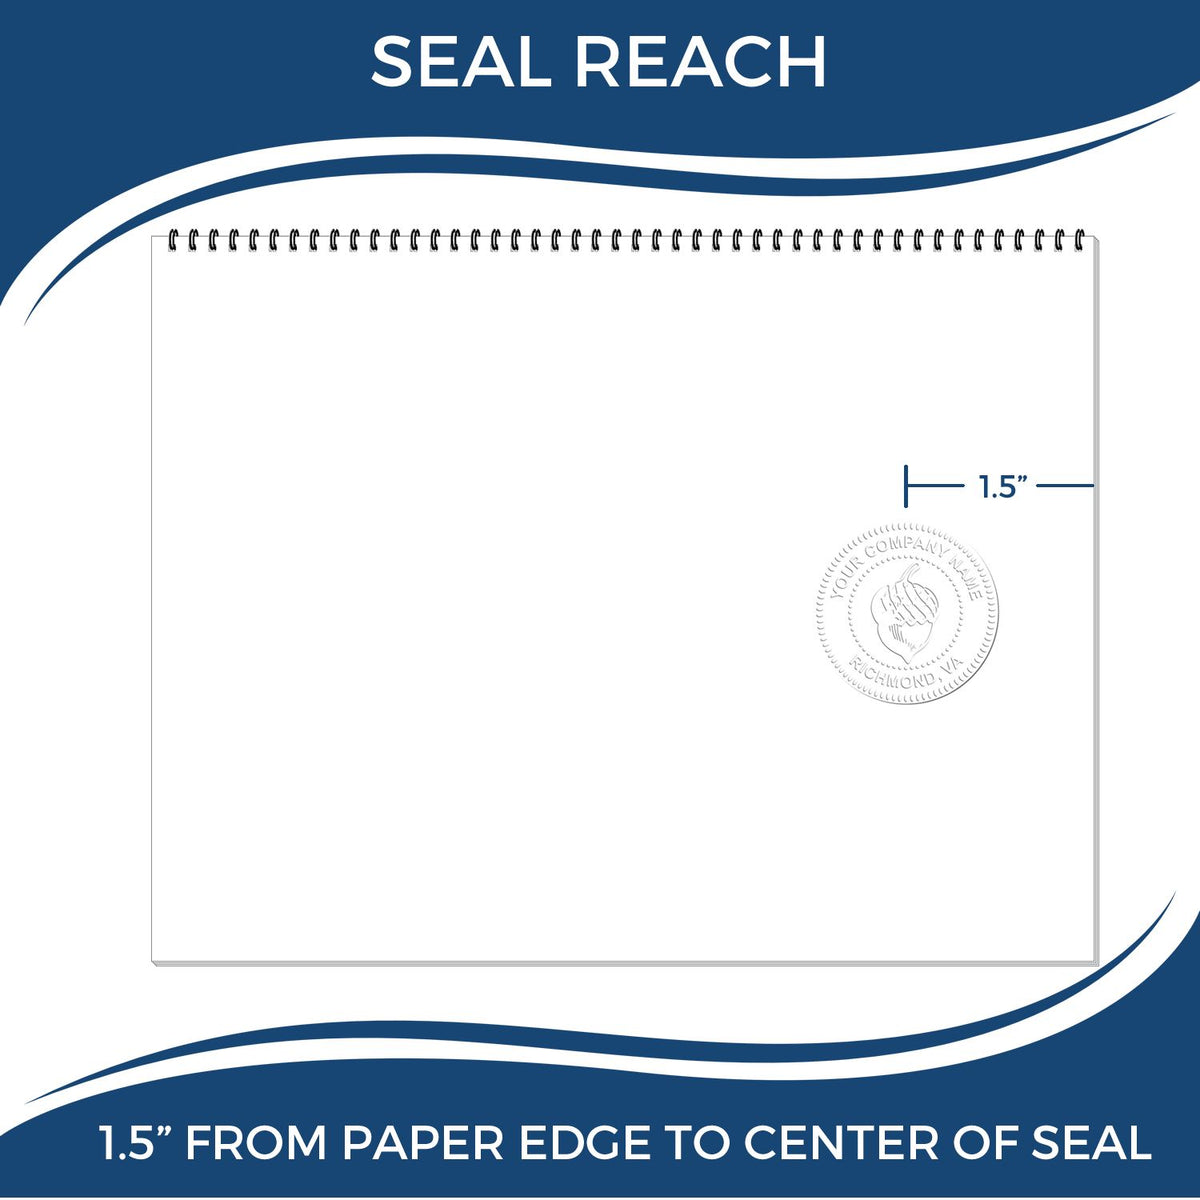 An infographic showing the seal reach which is represented by a ruler and a miniature seal image of the Handheld Nevada Professional Engineer Embosser